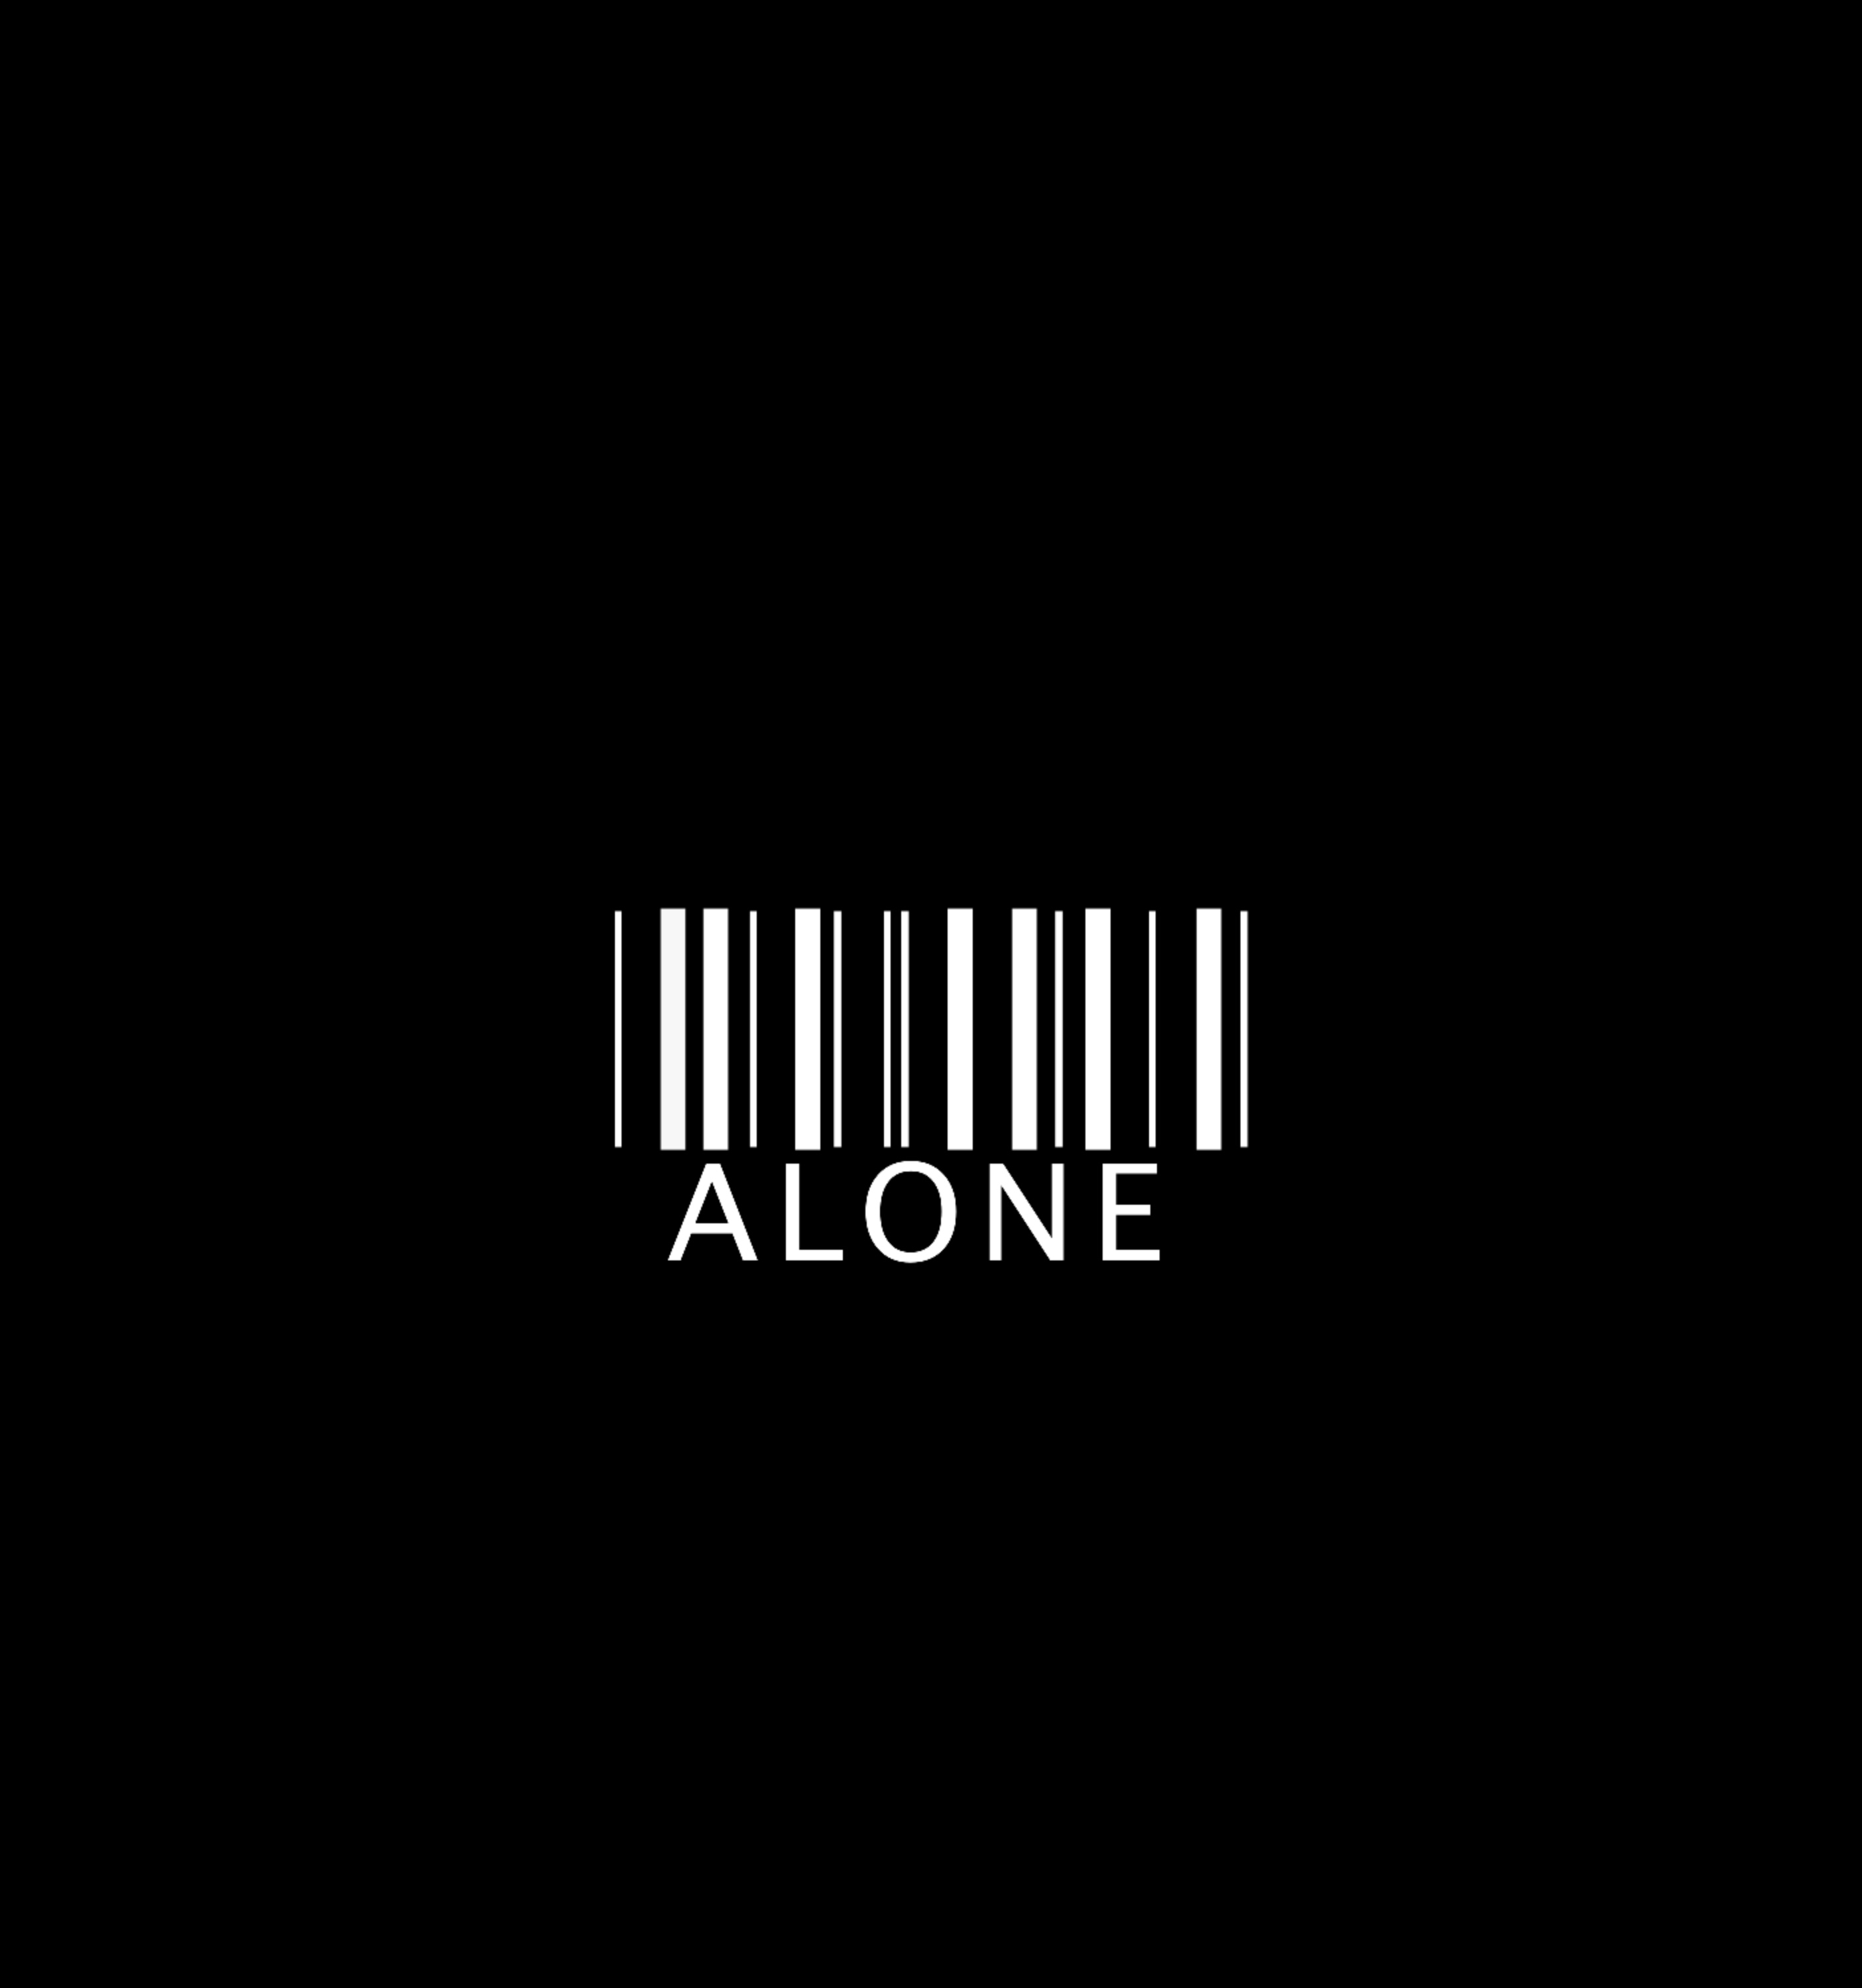 loneliness, words, life, inscription, barcode Full HD